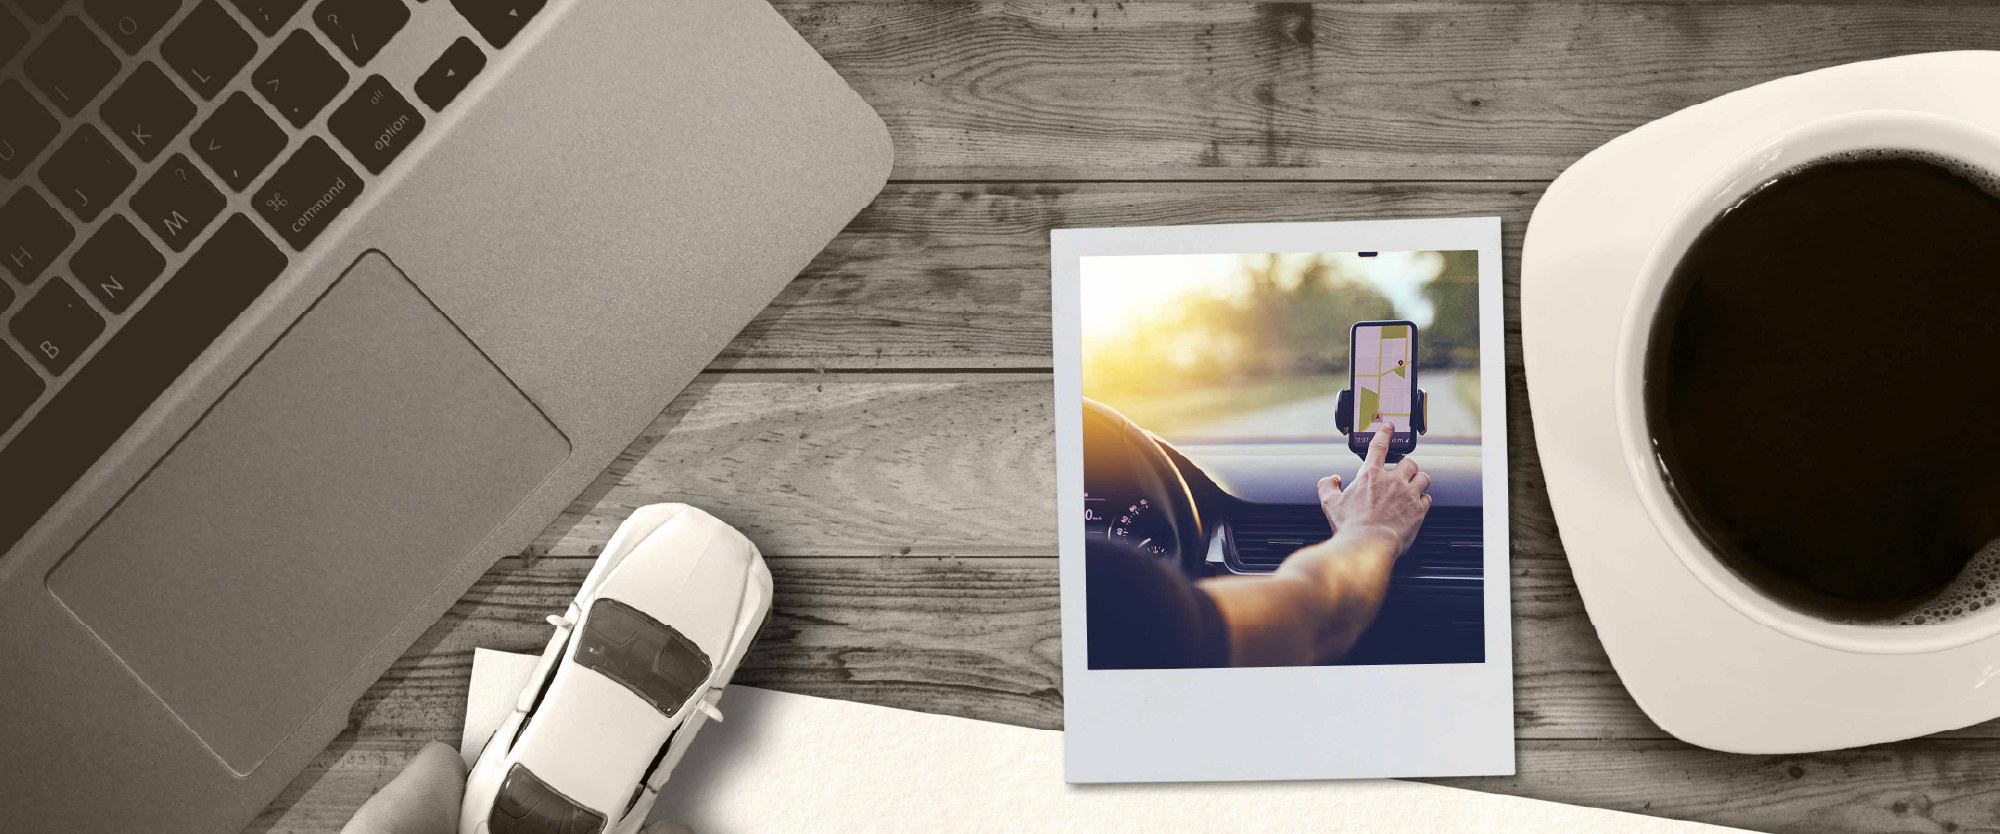 smartphone with an image of an auto on the road next to a laptop and coffee cup